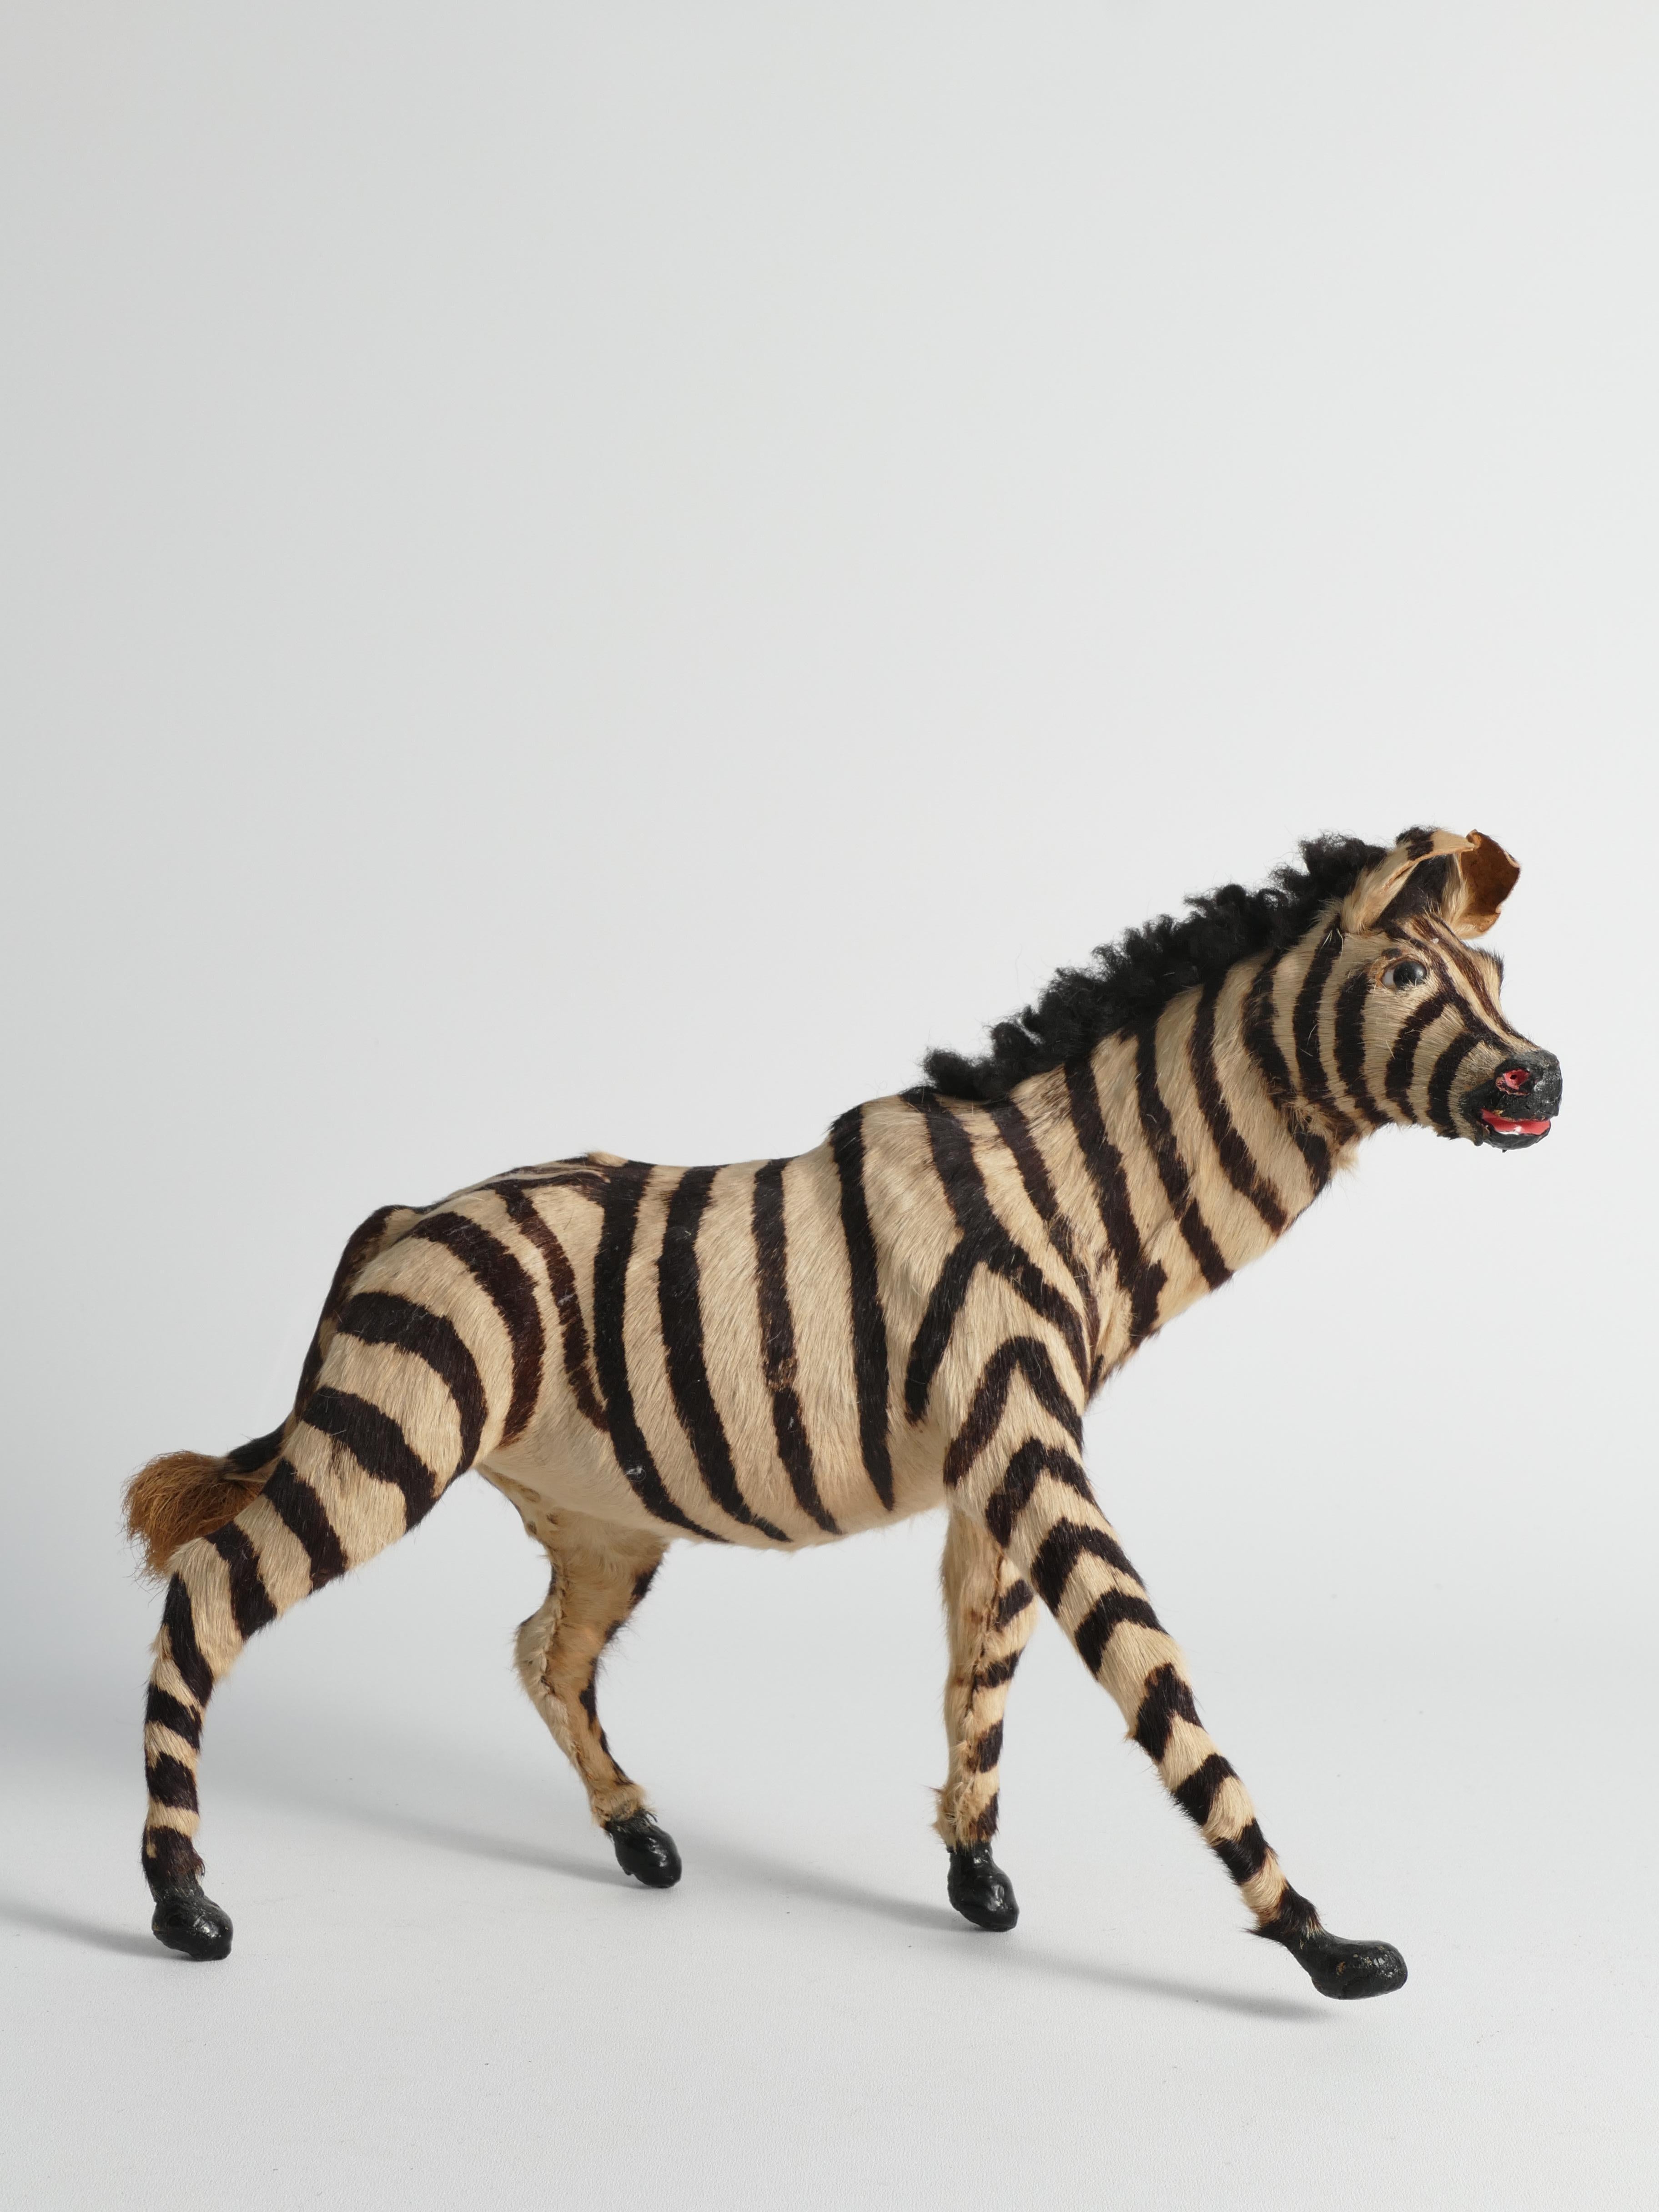 Other Early 20th Century Zebra Figurine For Sale